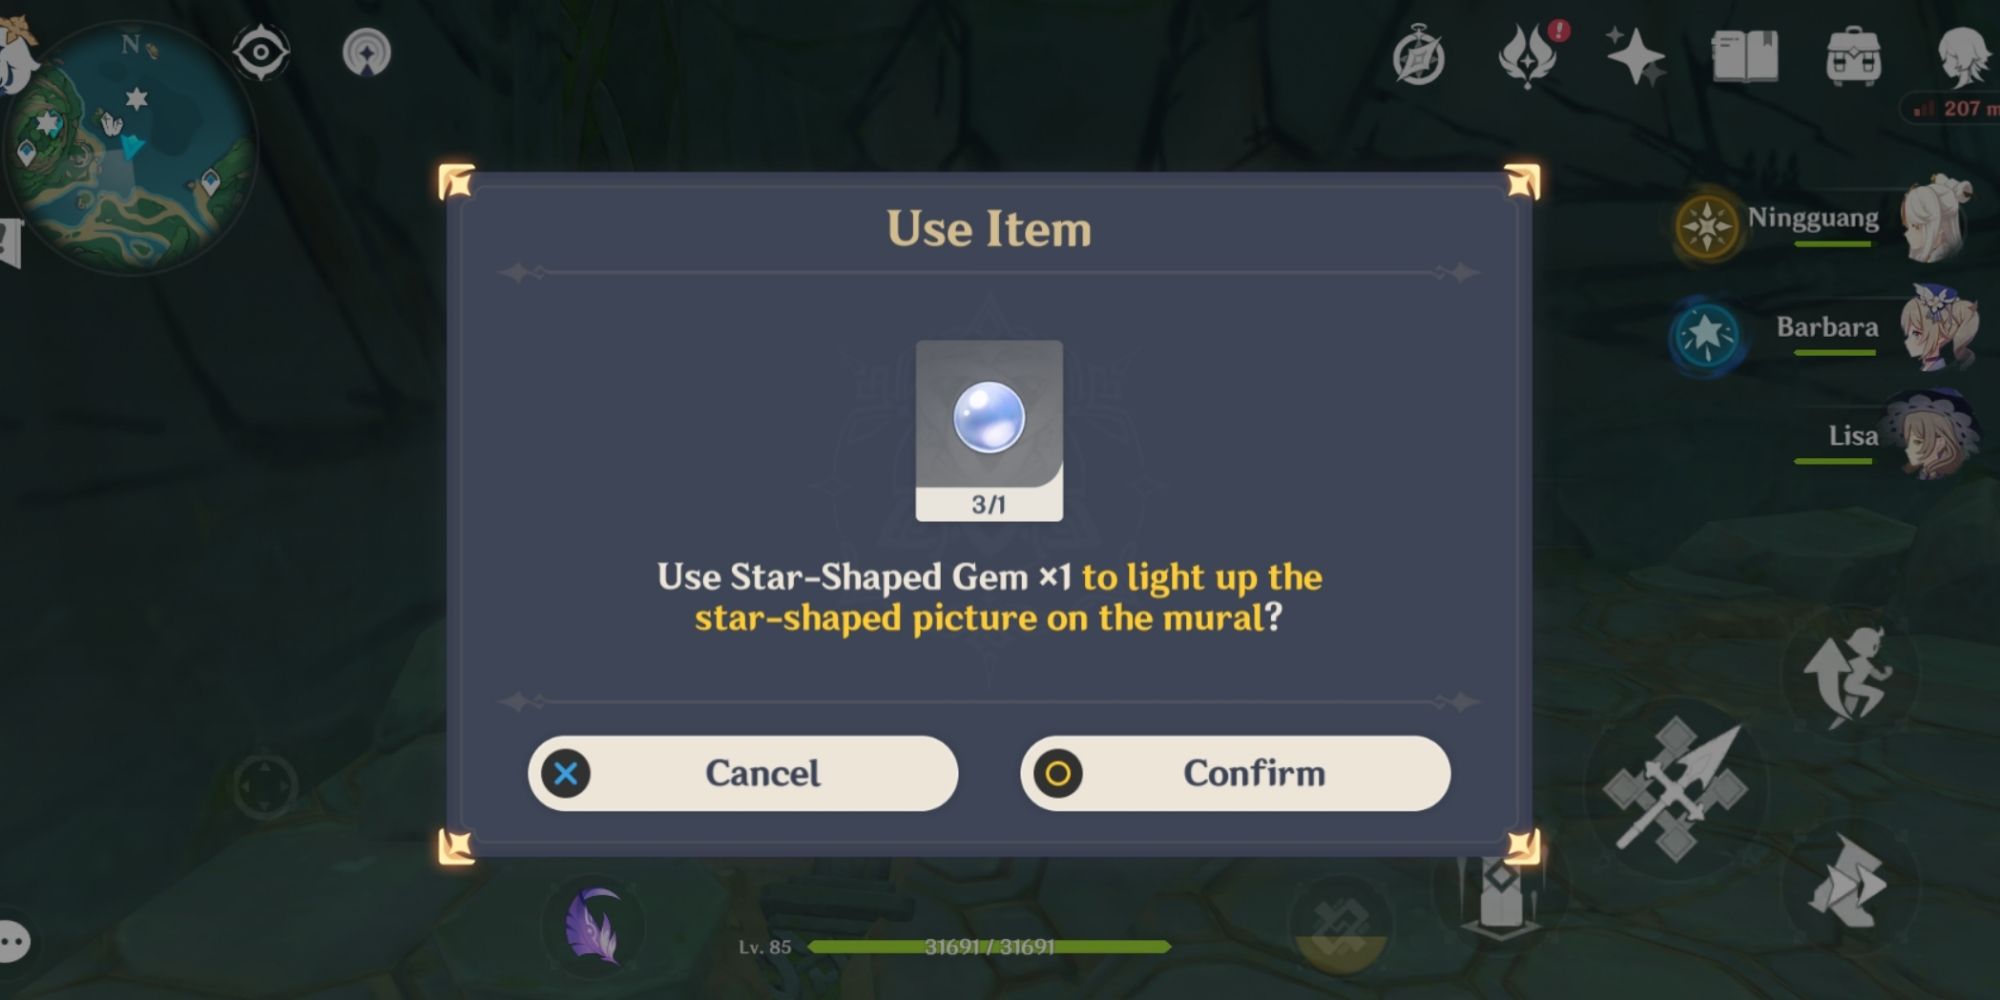 How to use Star-shaped Gem